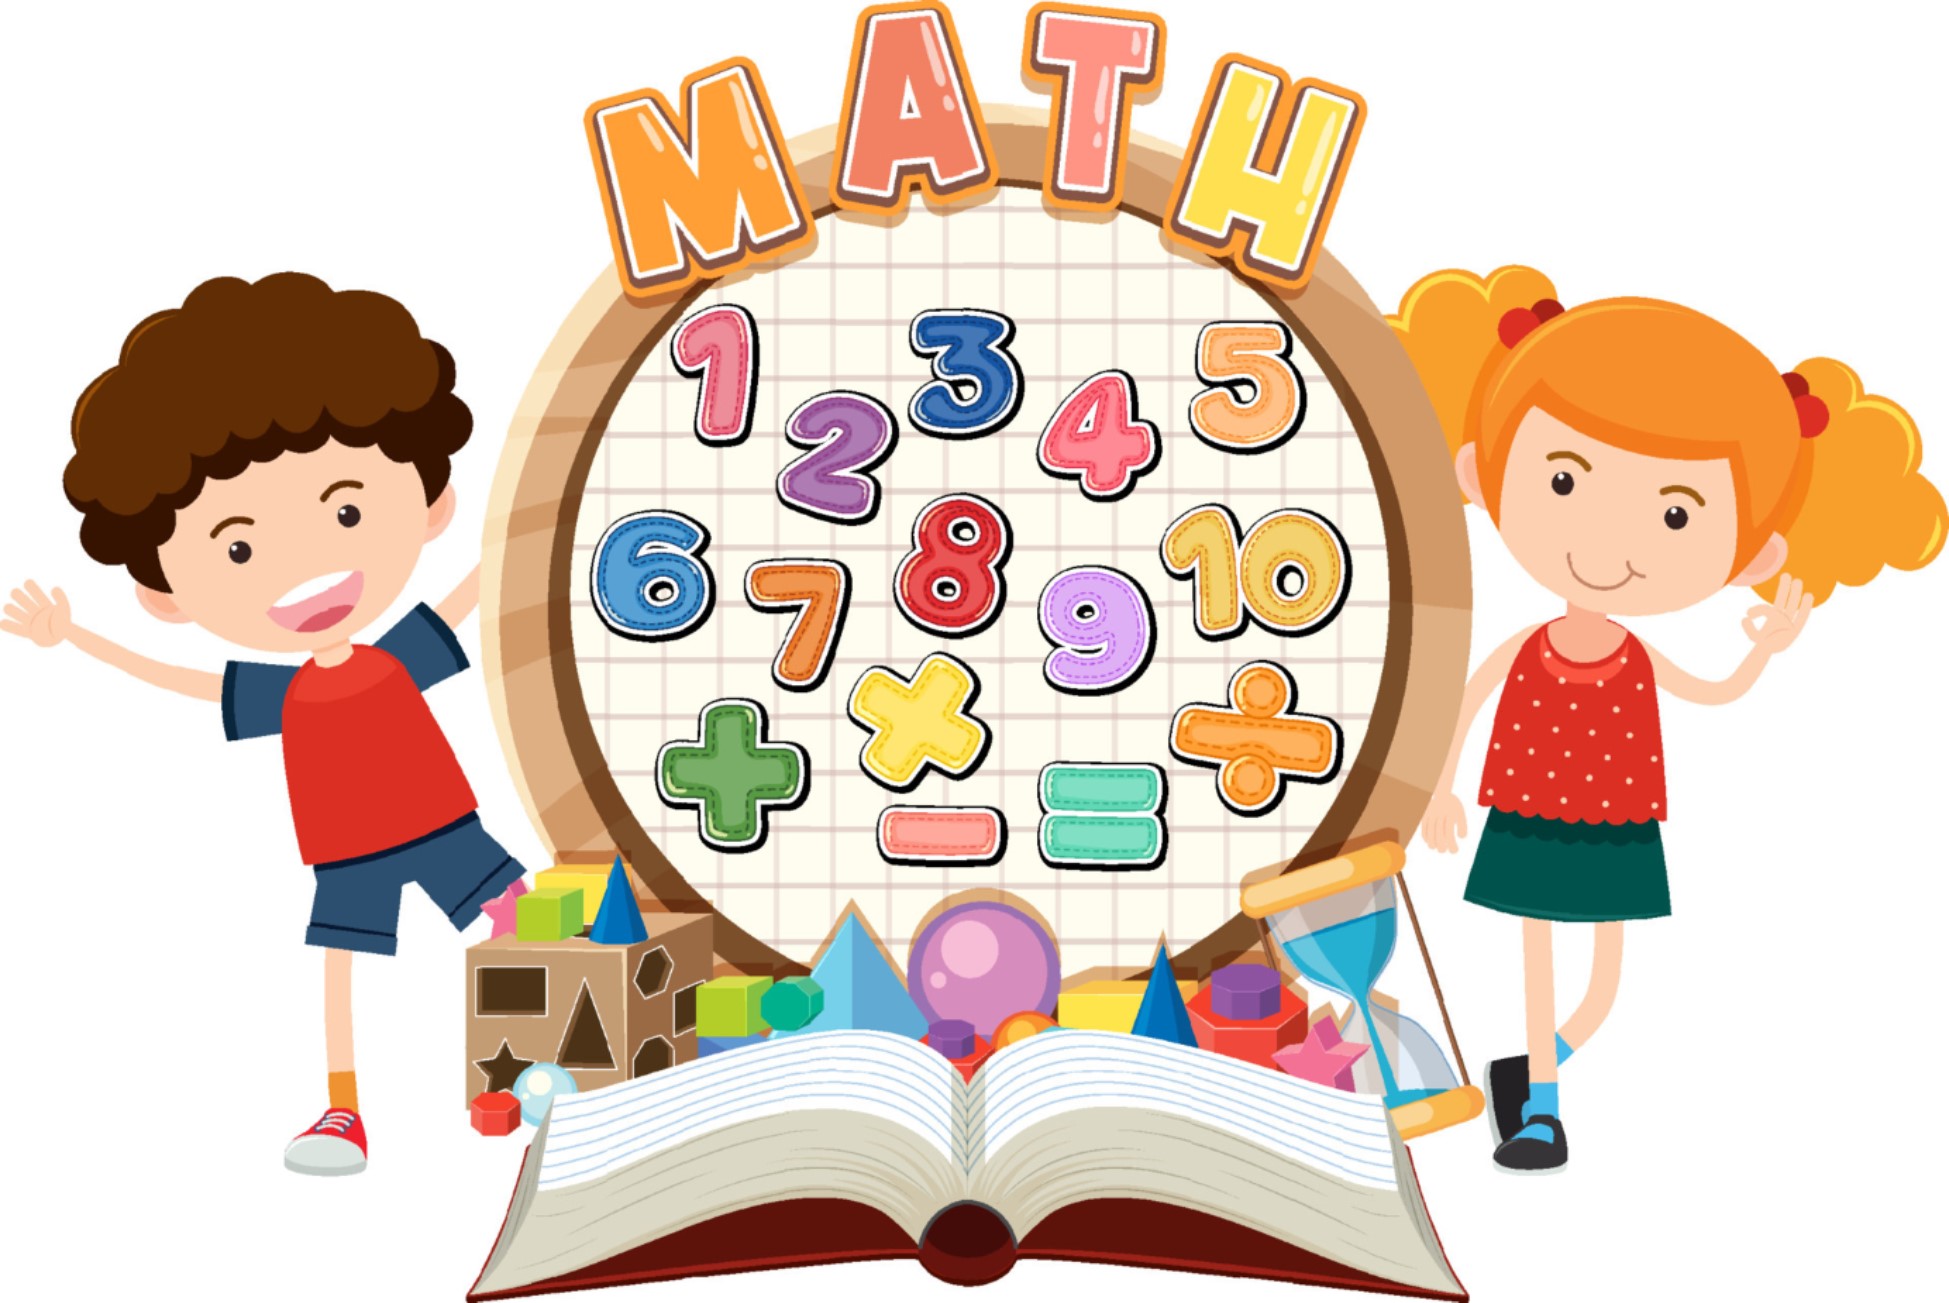 A boy and girl standing next to math symbols and an open book. 